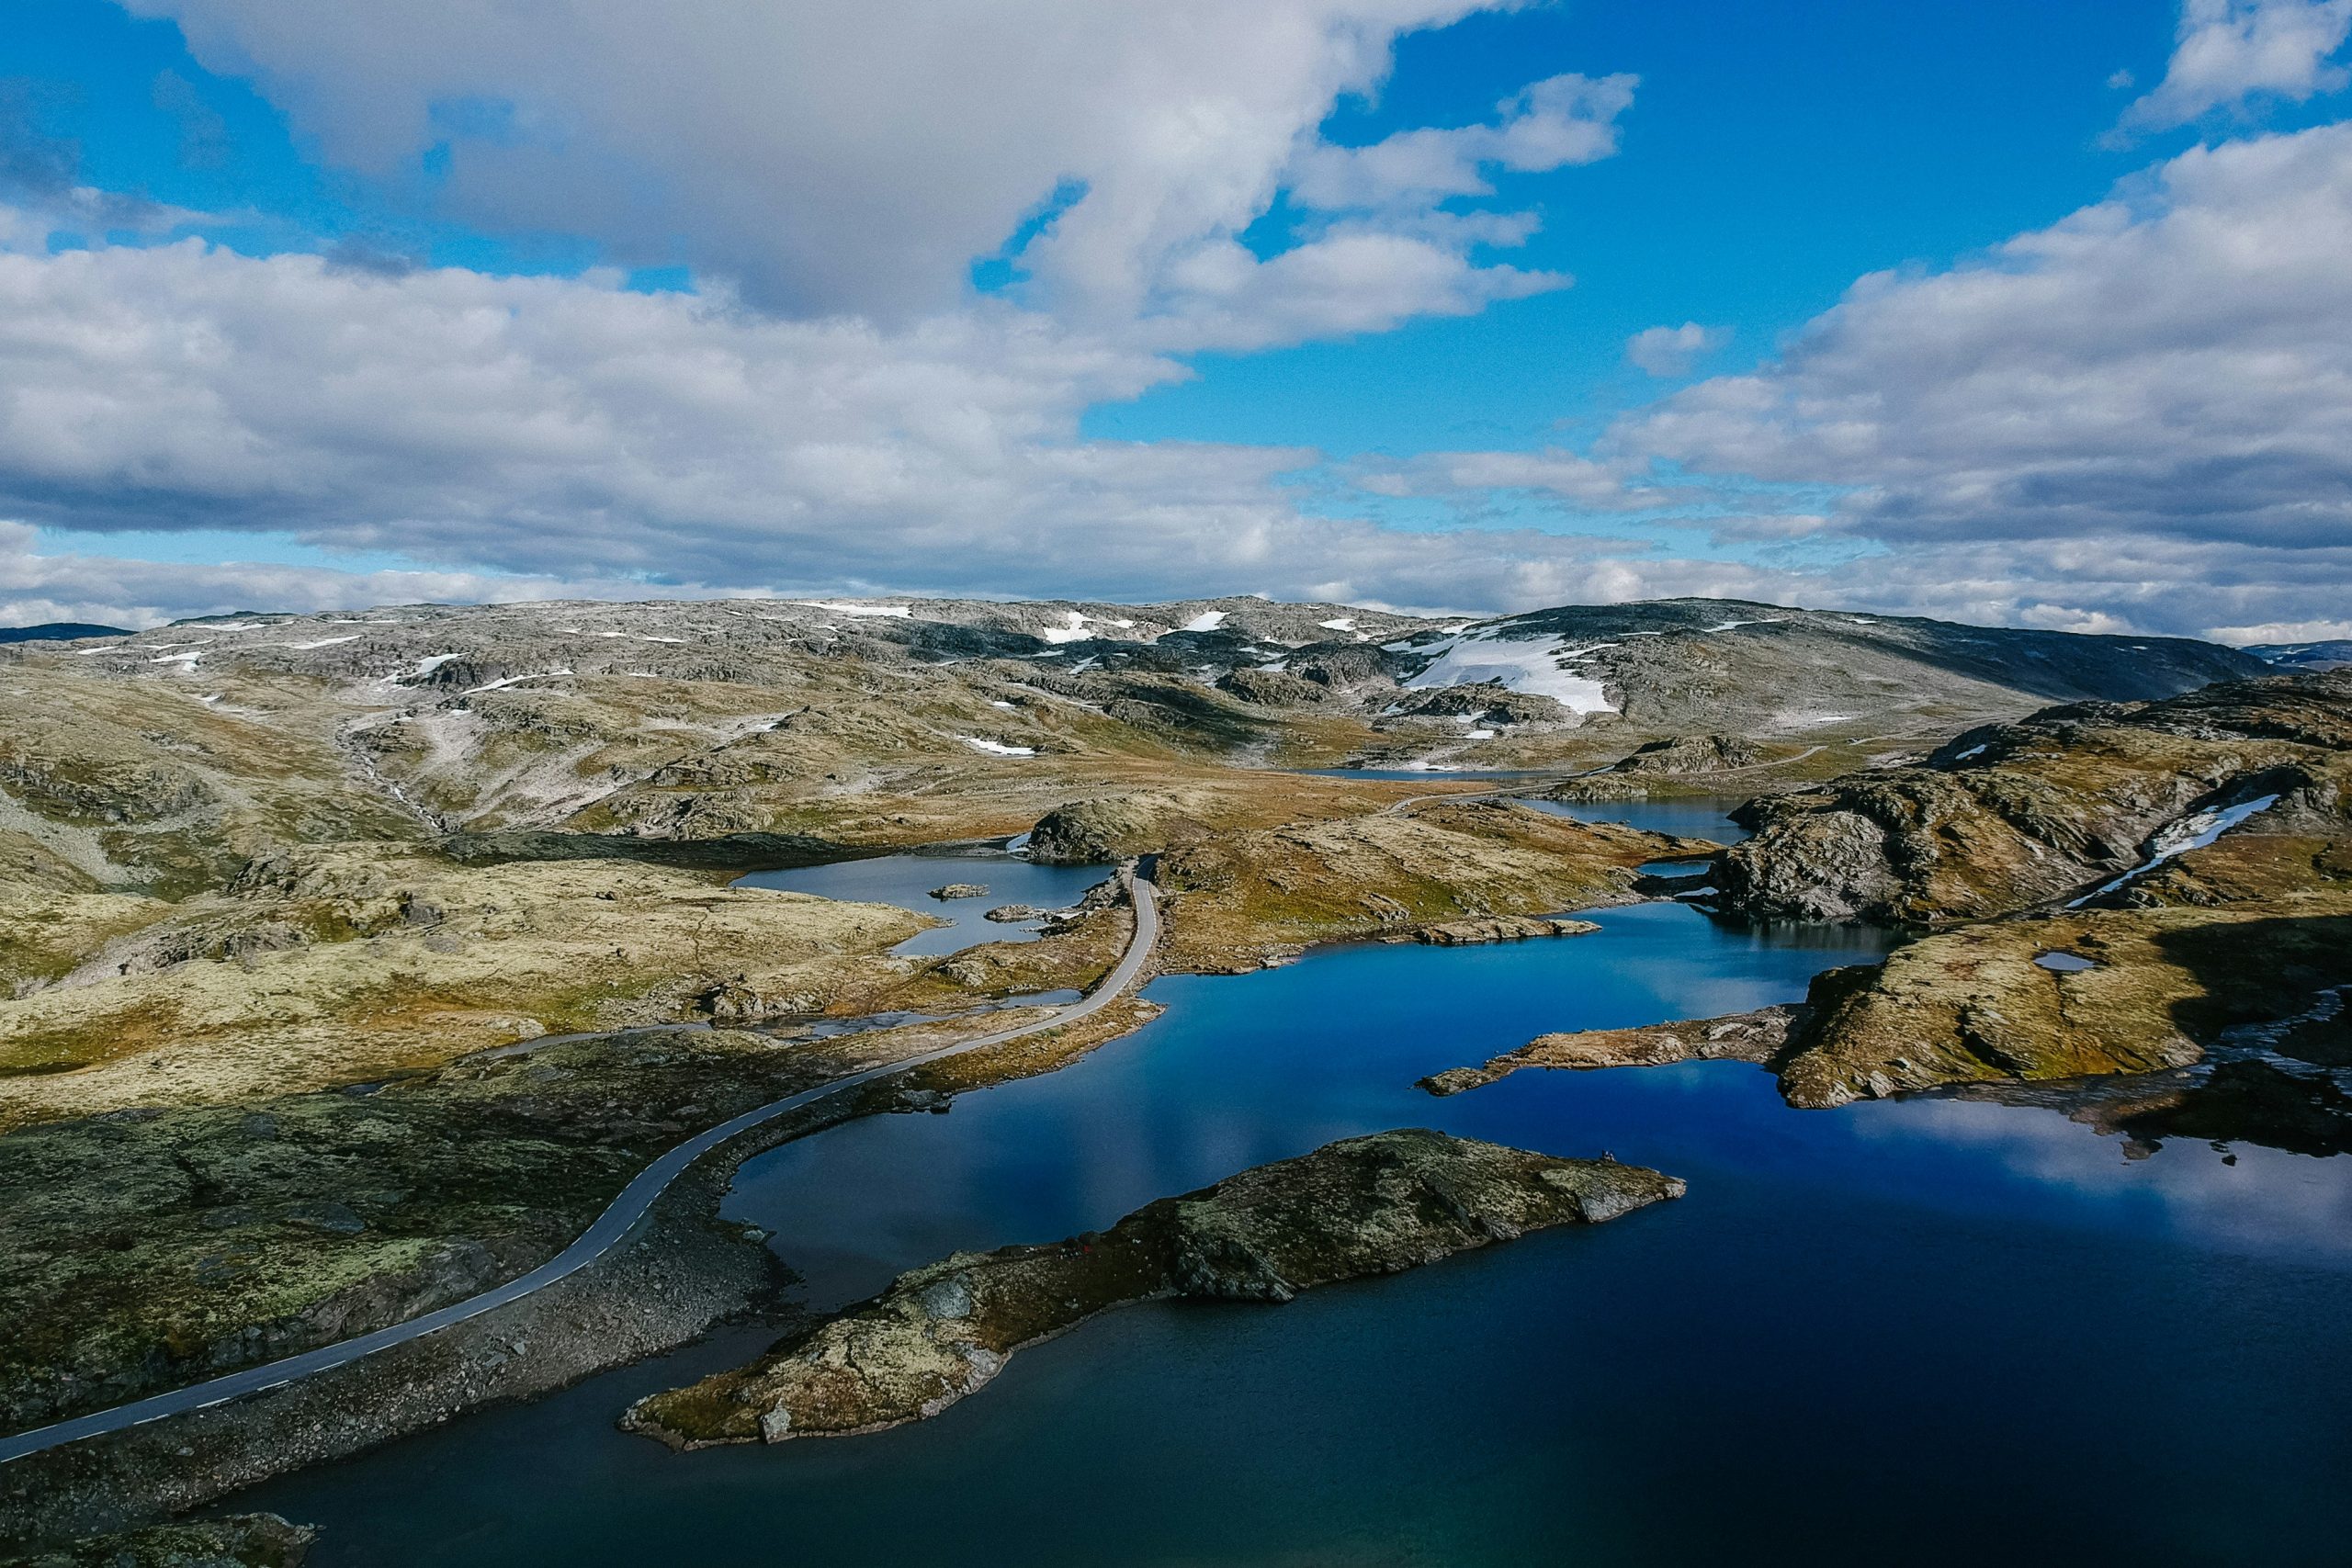 discover the breathtaking beauty of fjords in norway, with their steep cliffs, crystal-clear waters, and dramatic landscapes. explore the wonders of these natural wonders and plan your next adventure in the fjords.